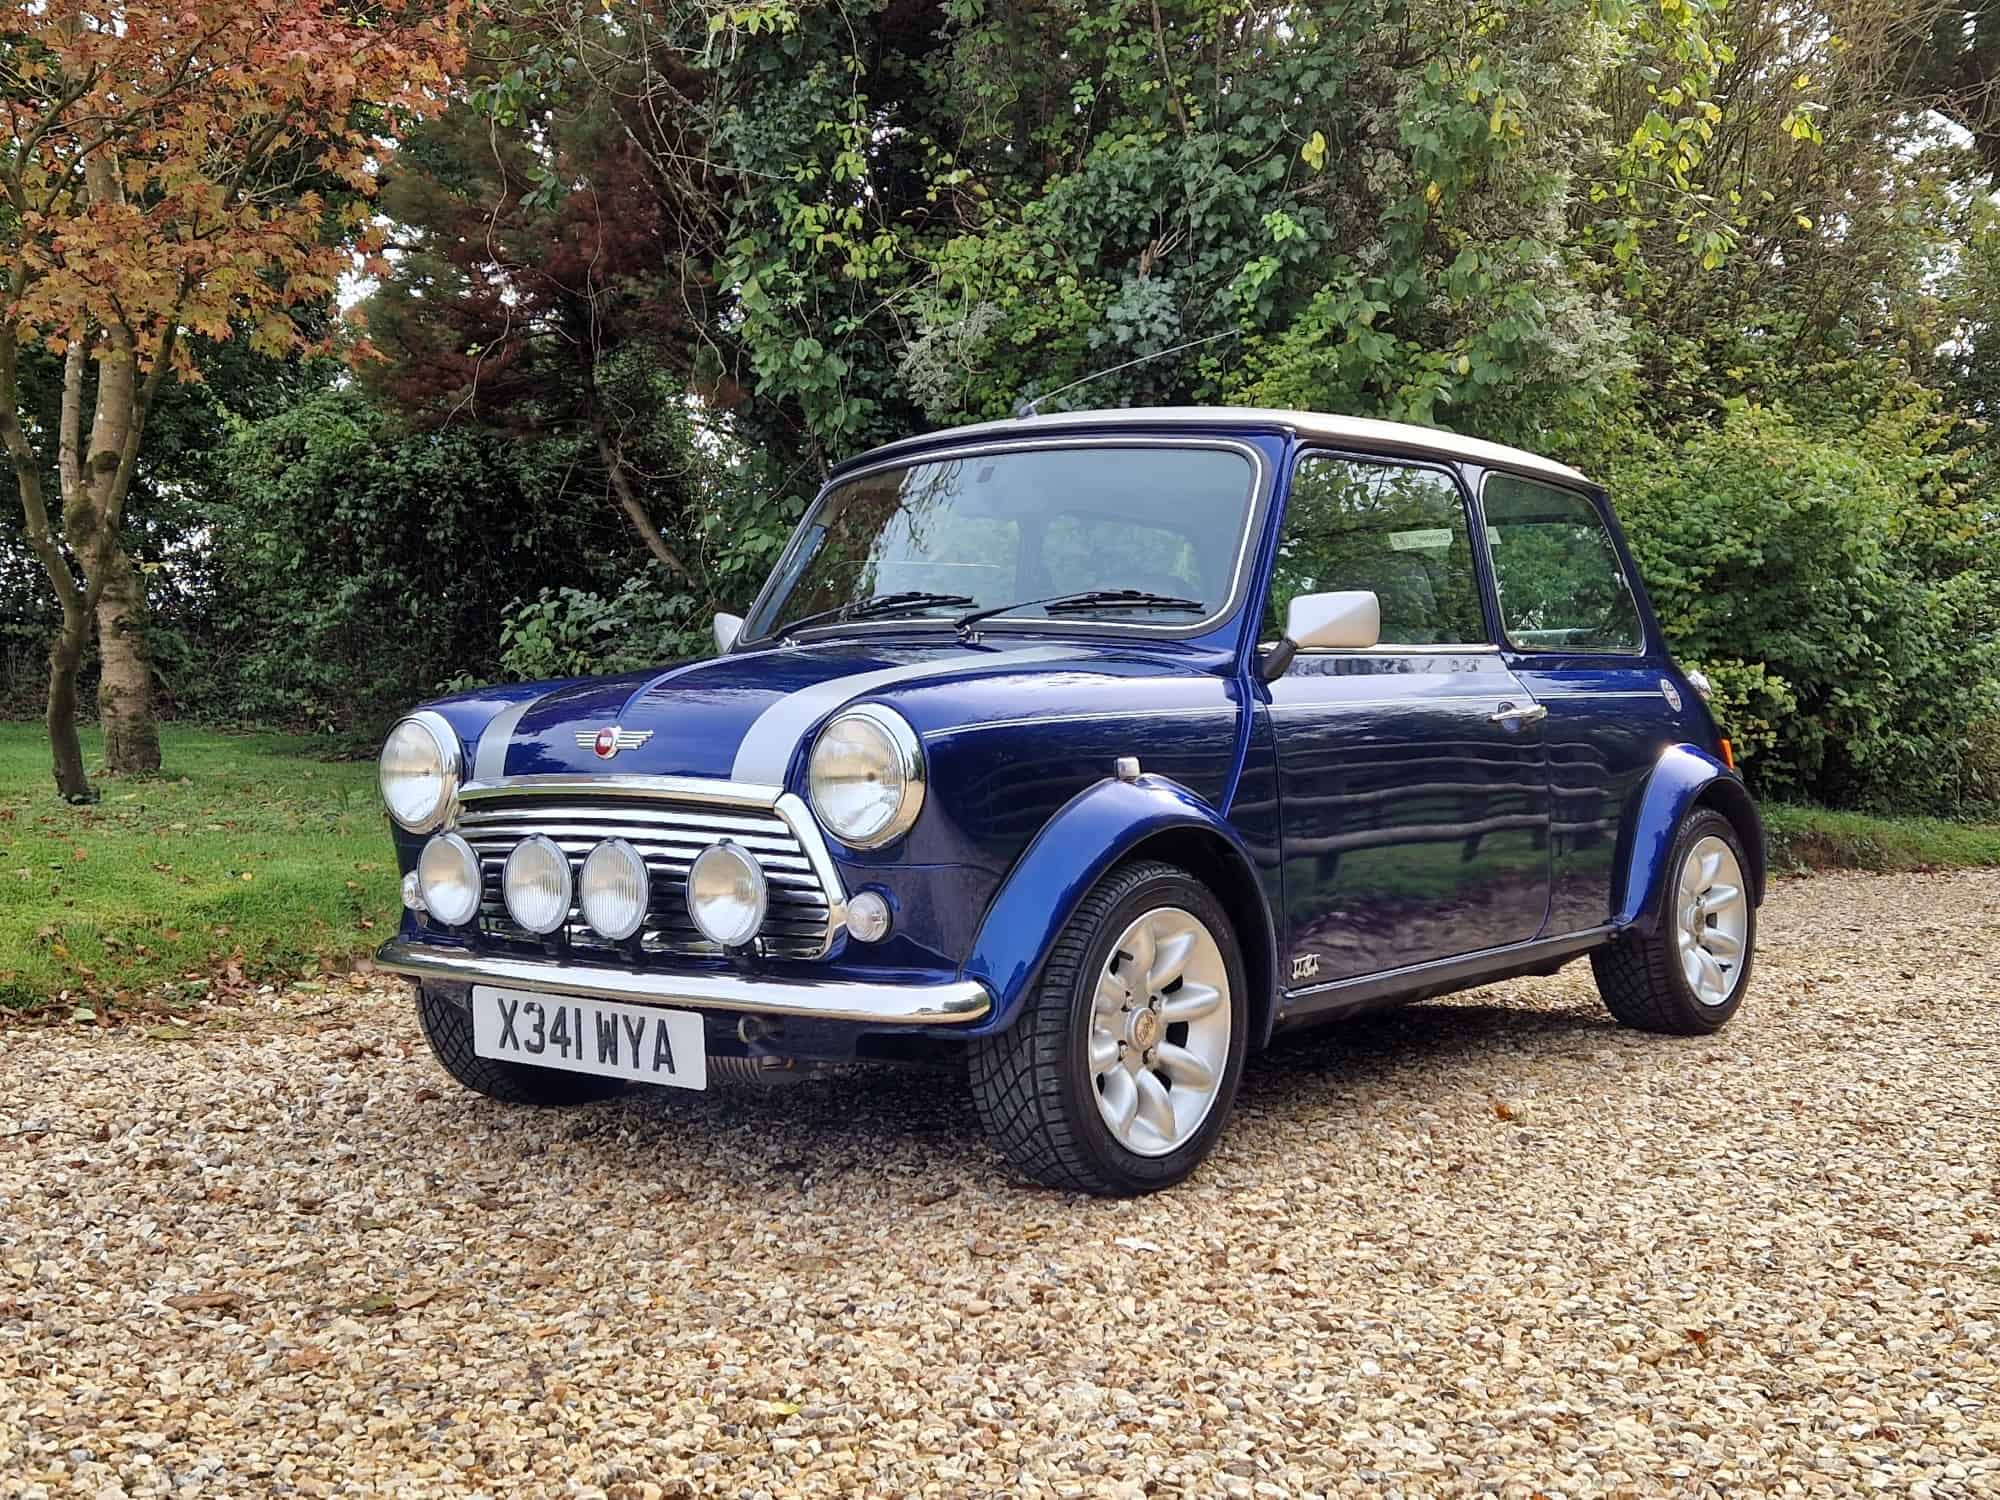 ** NOW SOLD ** 2000 Rover Mini Cooper S Works By John Cooper Garages.